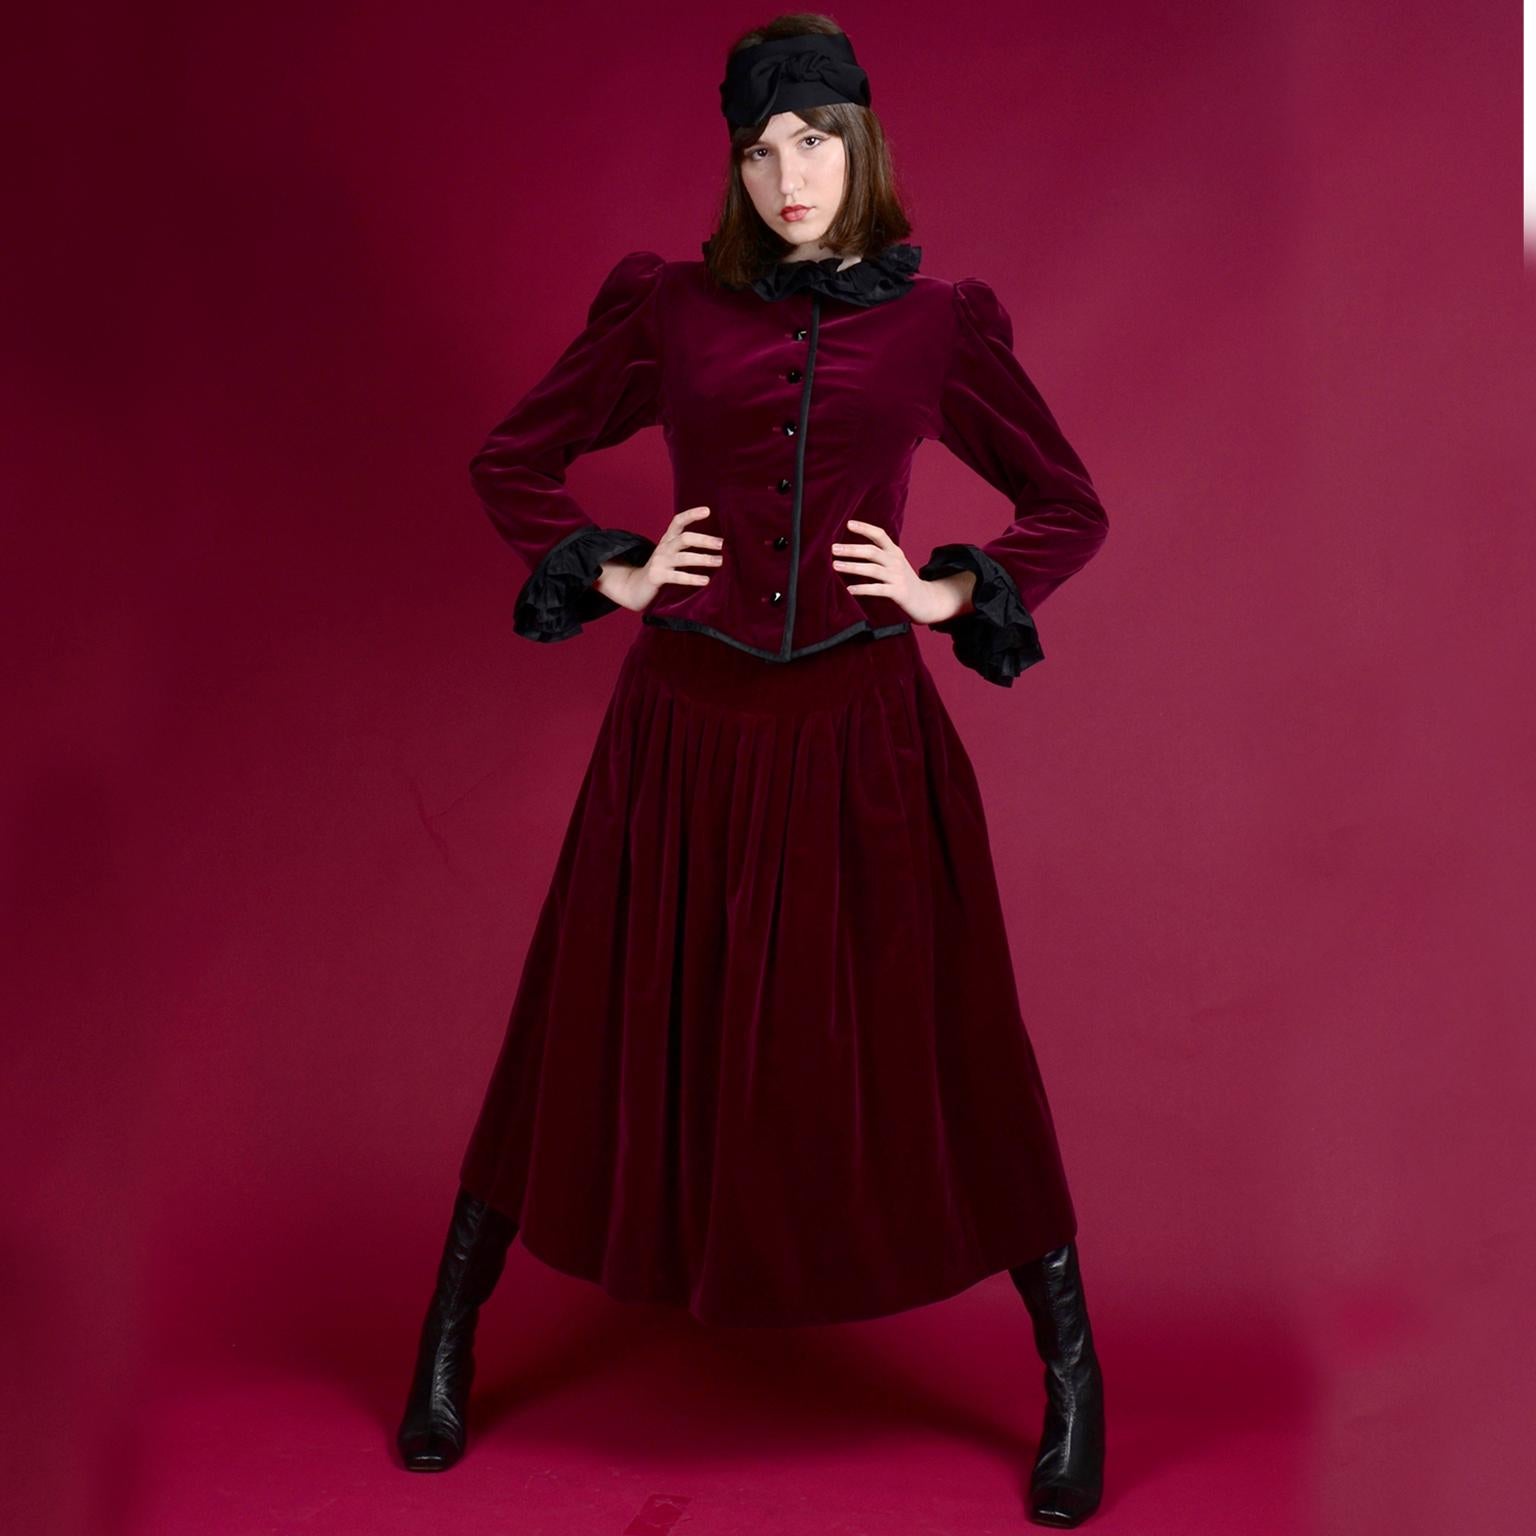 This incredible 2 piece evening ensemble is from Yves Saint Laurent and includes a jacket and a beautiful skirt both in luxe burgundy velvet.  Such a perfect holiday outfit! The fitted jacket is fully lined, and it has ruffled black taffeta on the